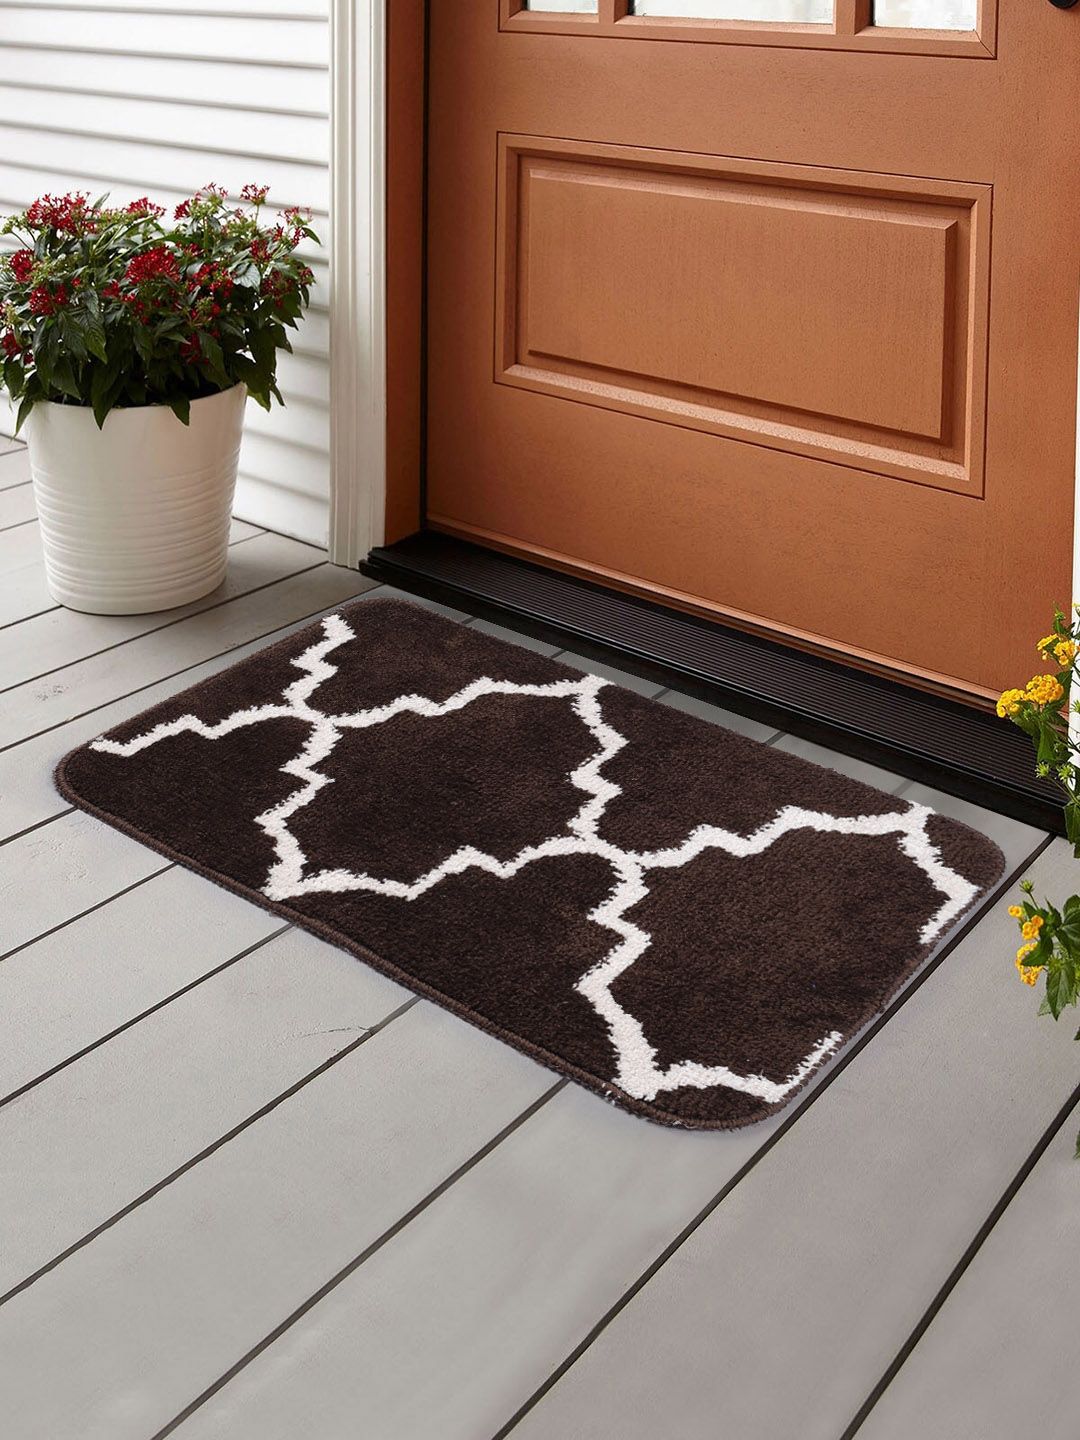 Saral Home Brown & Off-White Ogee Microfibre Anti-Skid Bath Rug Price in India